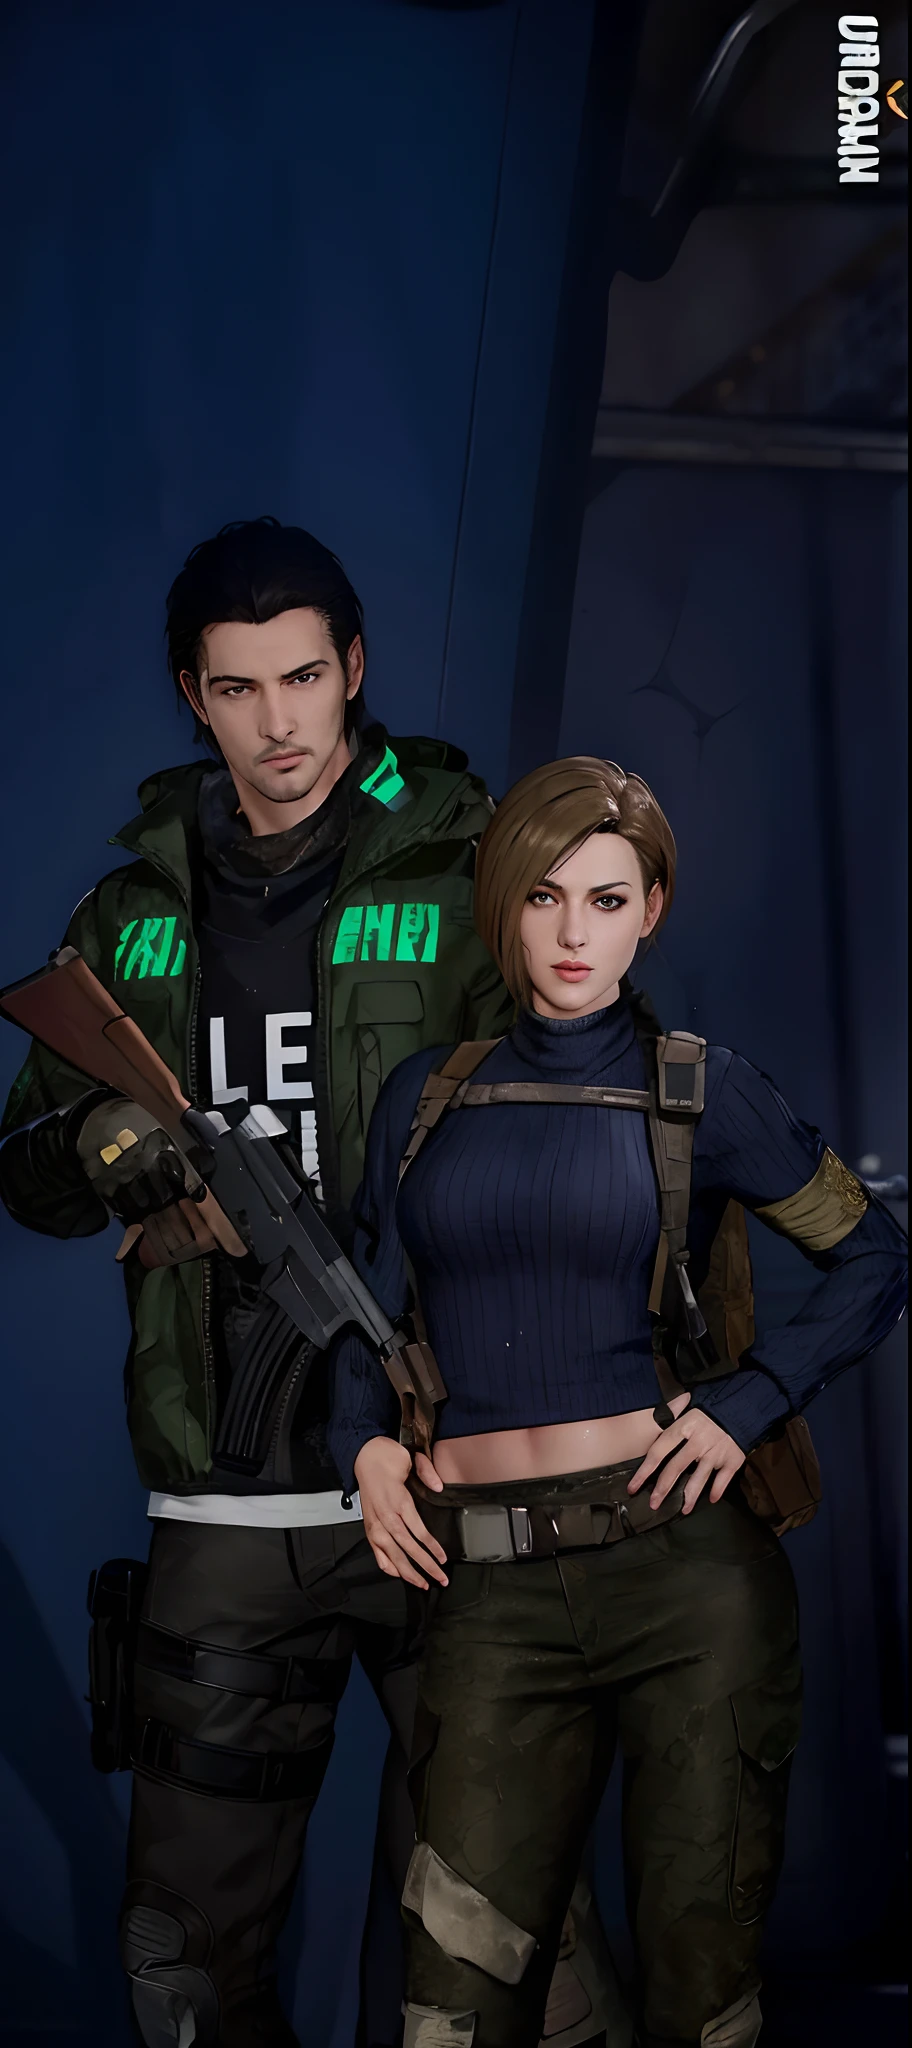 there are two people standing next to each other with guns, medium shot of two characters, realistic artstyle, unreal 5. rpg portrait, character close up, close up character, character art closeup, 8 k character details, resident evil inspired, background of resident evil game, 2020 video game screenshot, glamorous jill valentine, character close-up, best quality